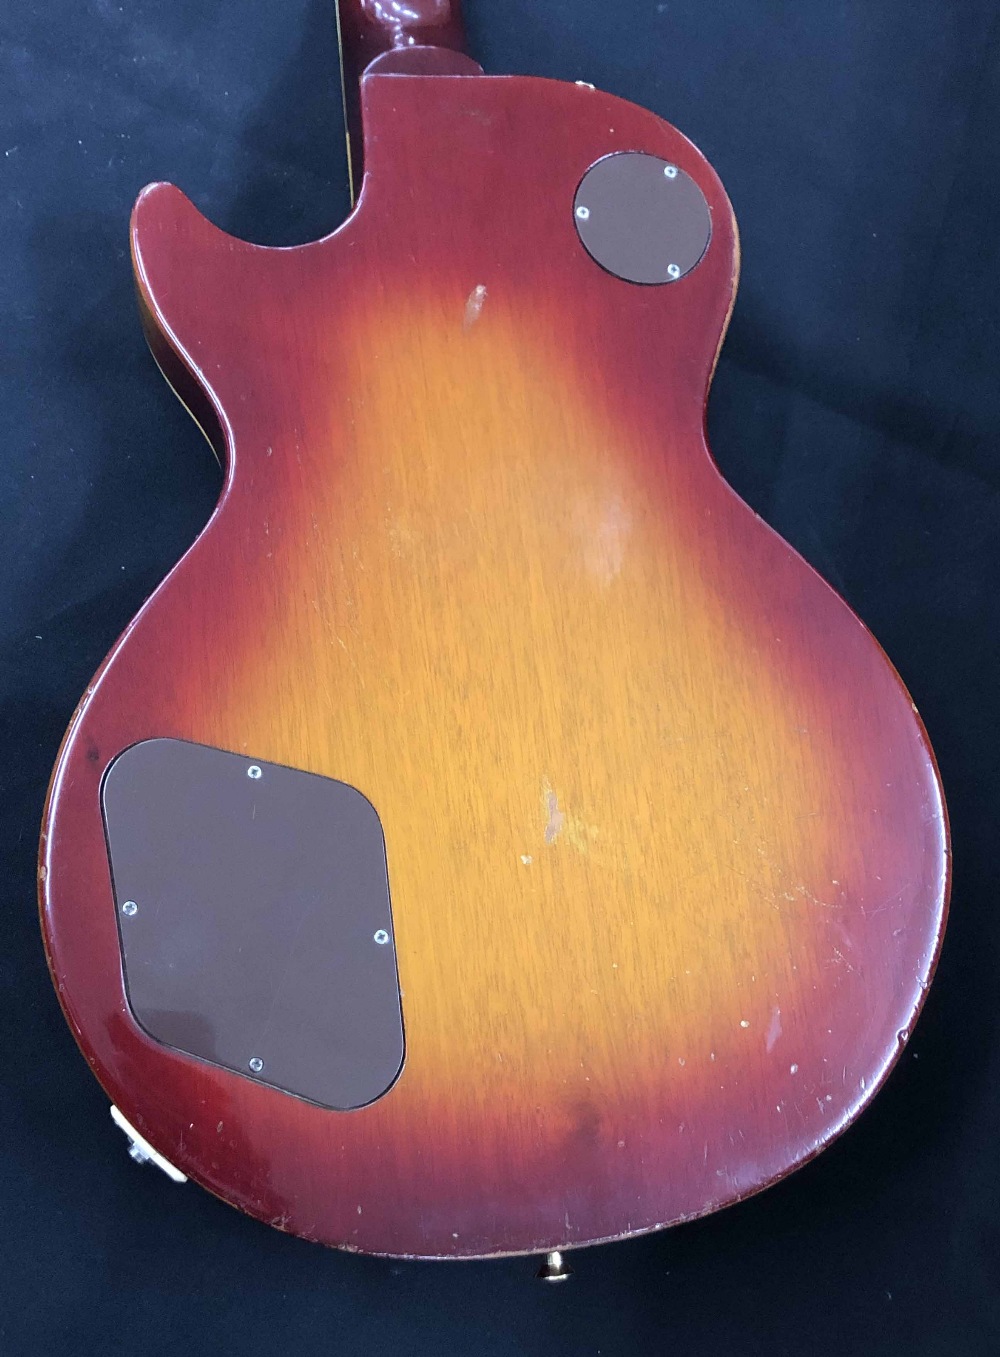 1971 Gibson Les Paul Deluxe electric guitar, made in USA, ser. no. 6xxxx2; Finish: cherry burst, - Image 18 of 18